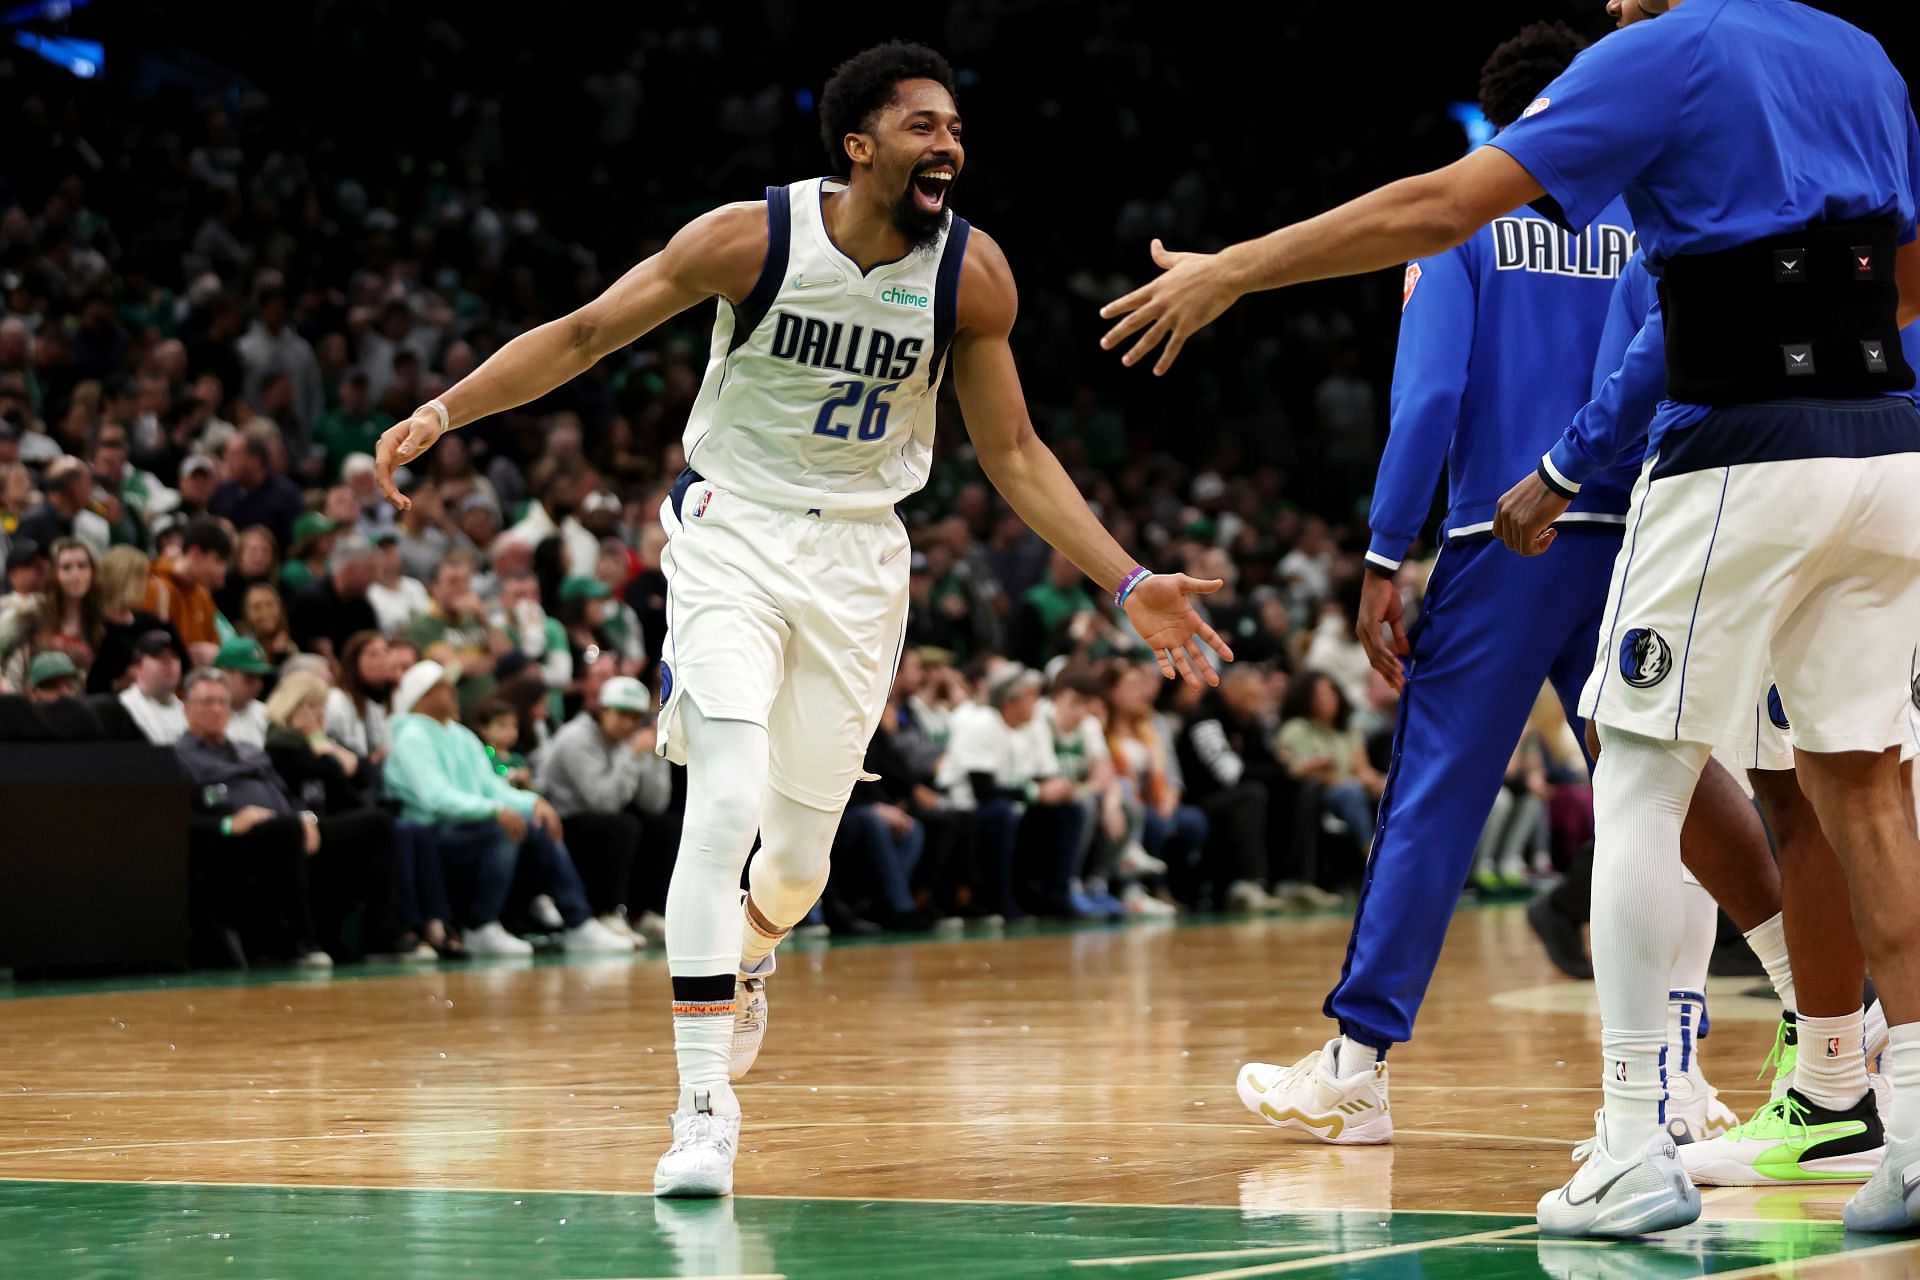 Spencer Dinwiddie has been terrific since joining the Dallas Mavericks